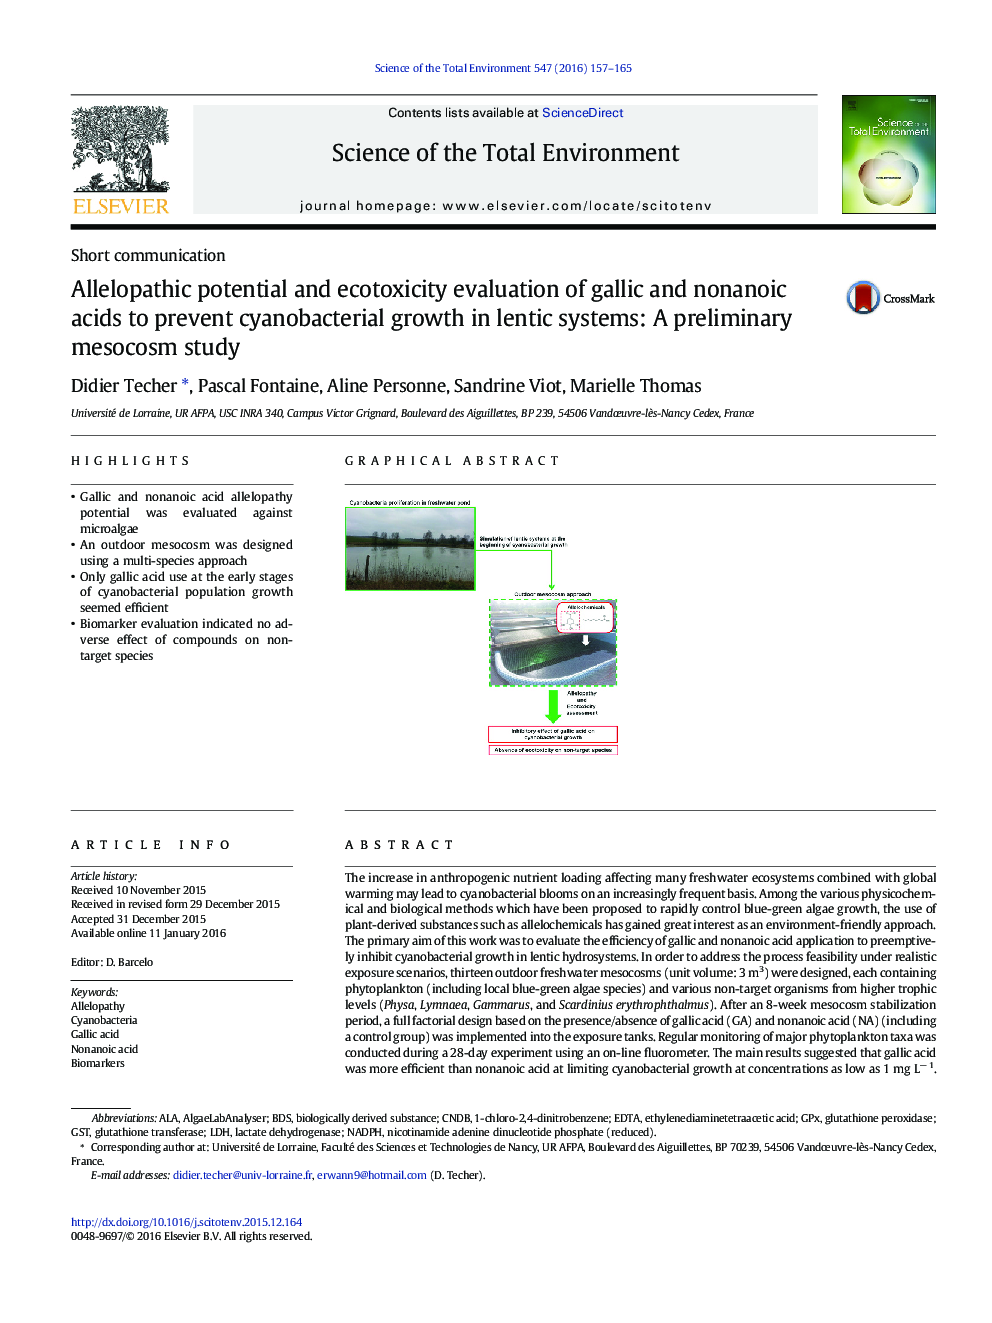 Short communicationAllelopathic potential and ecotoxicity evaluation of gallic and nonanoic acids to prevent cyanobacterial growth in lentic systems: A preliminary mesocosm study